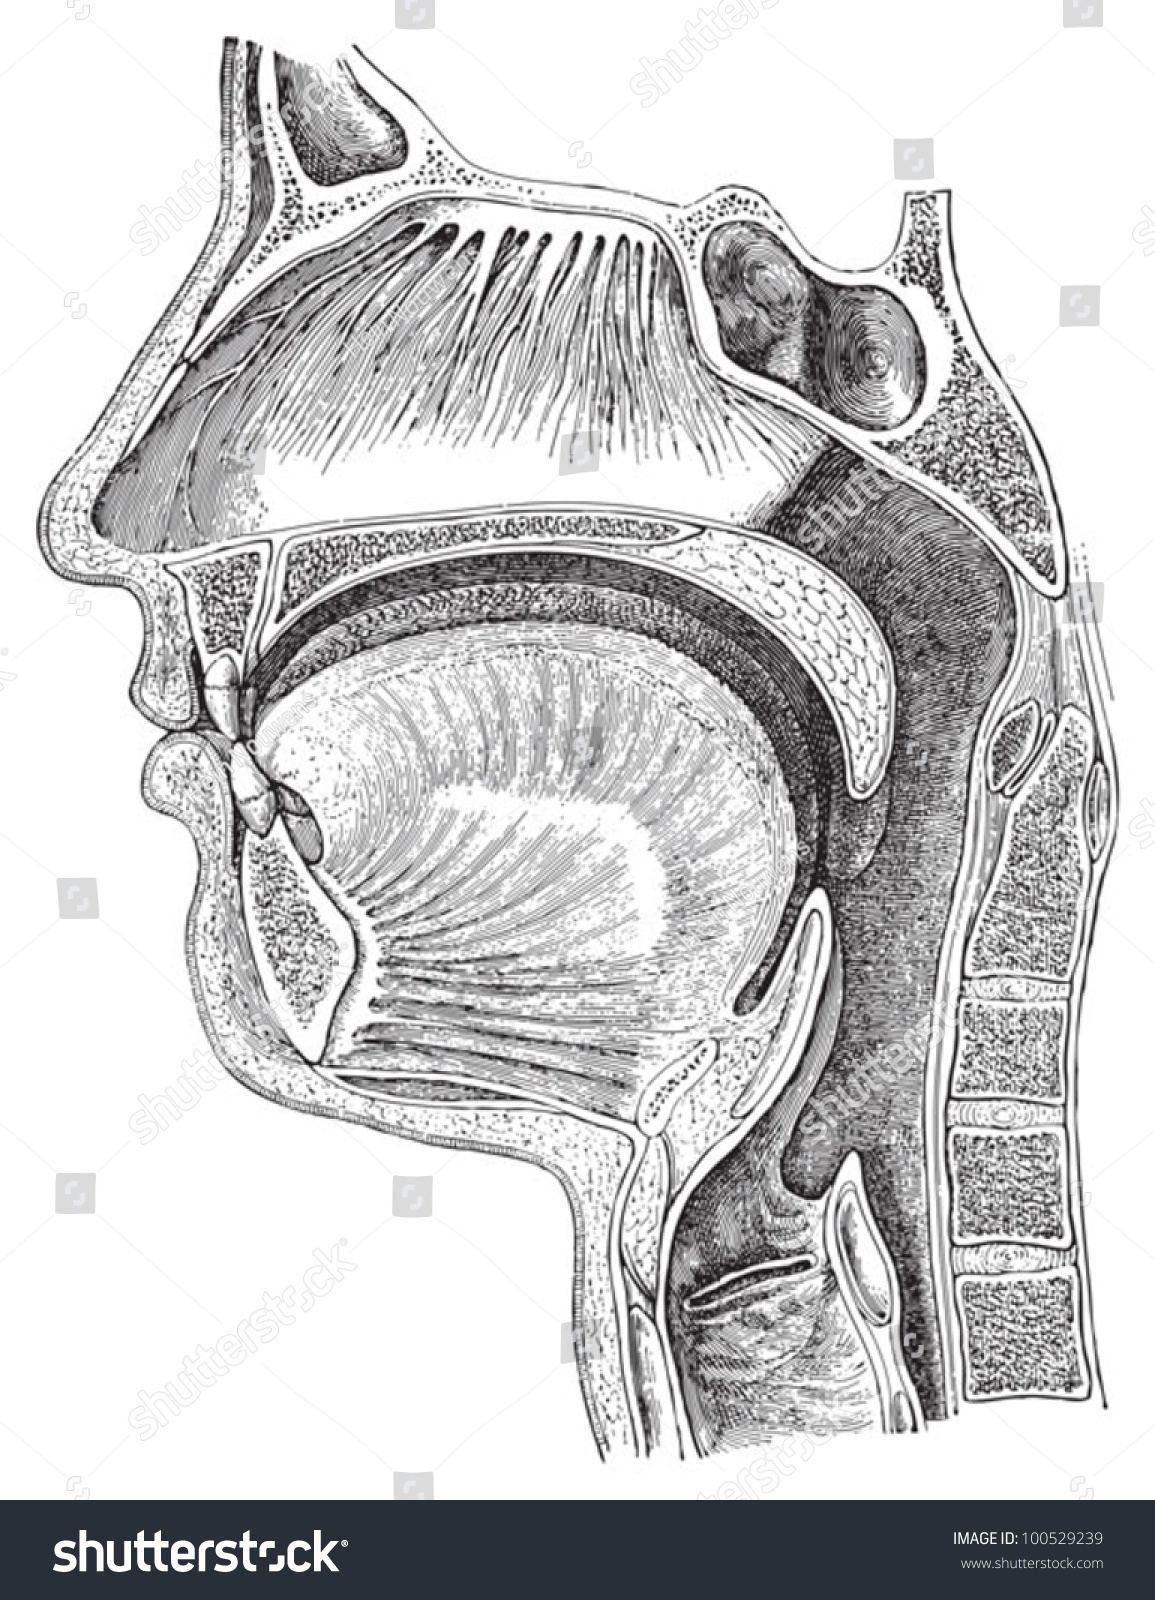 New Throat Drawing Sketch for Adult